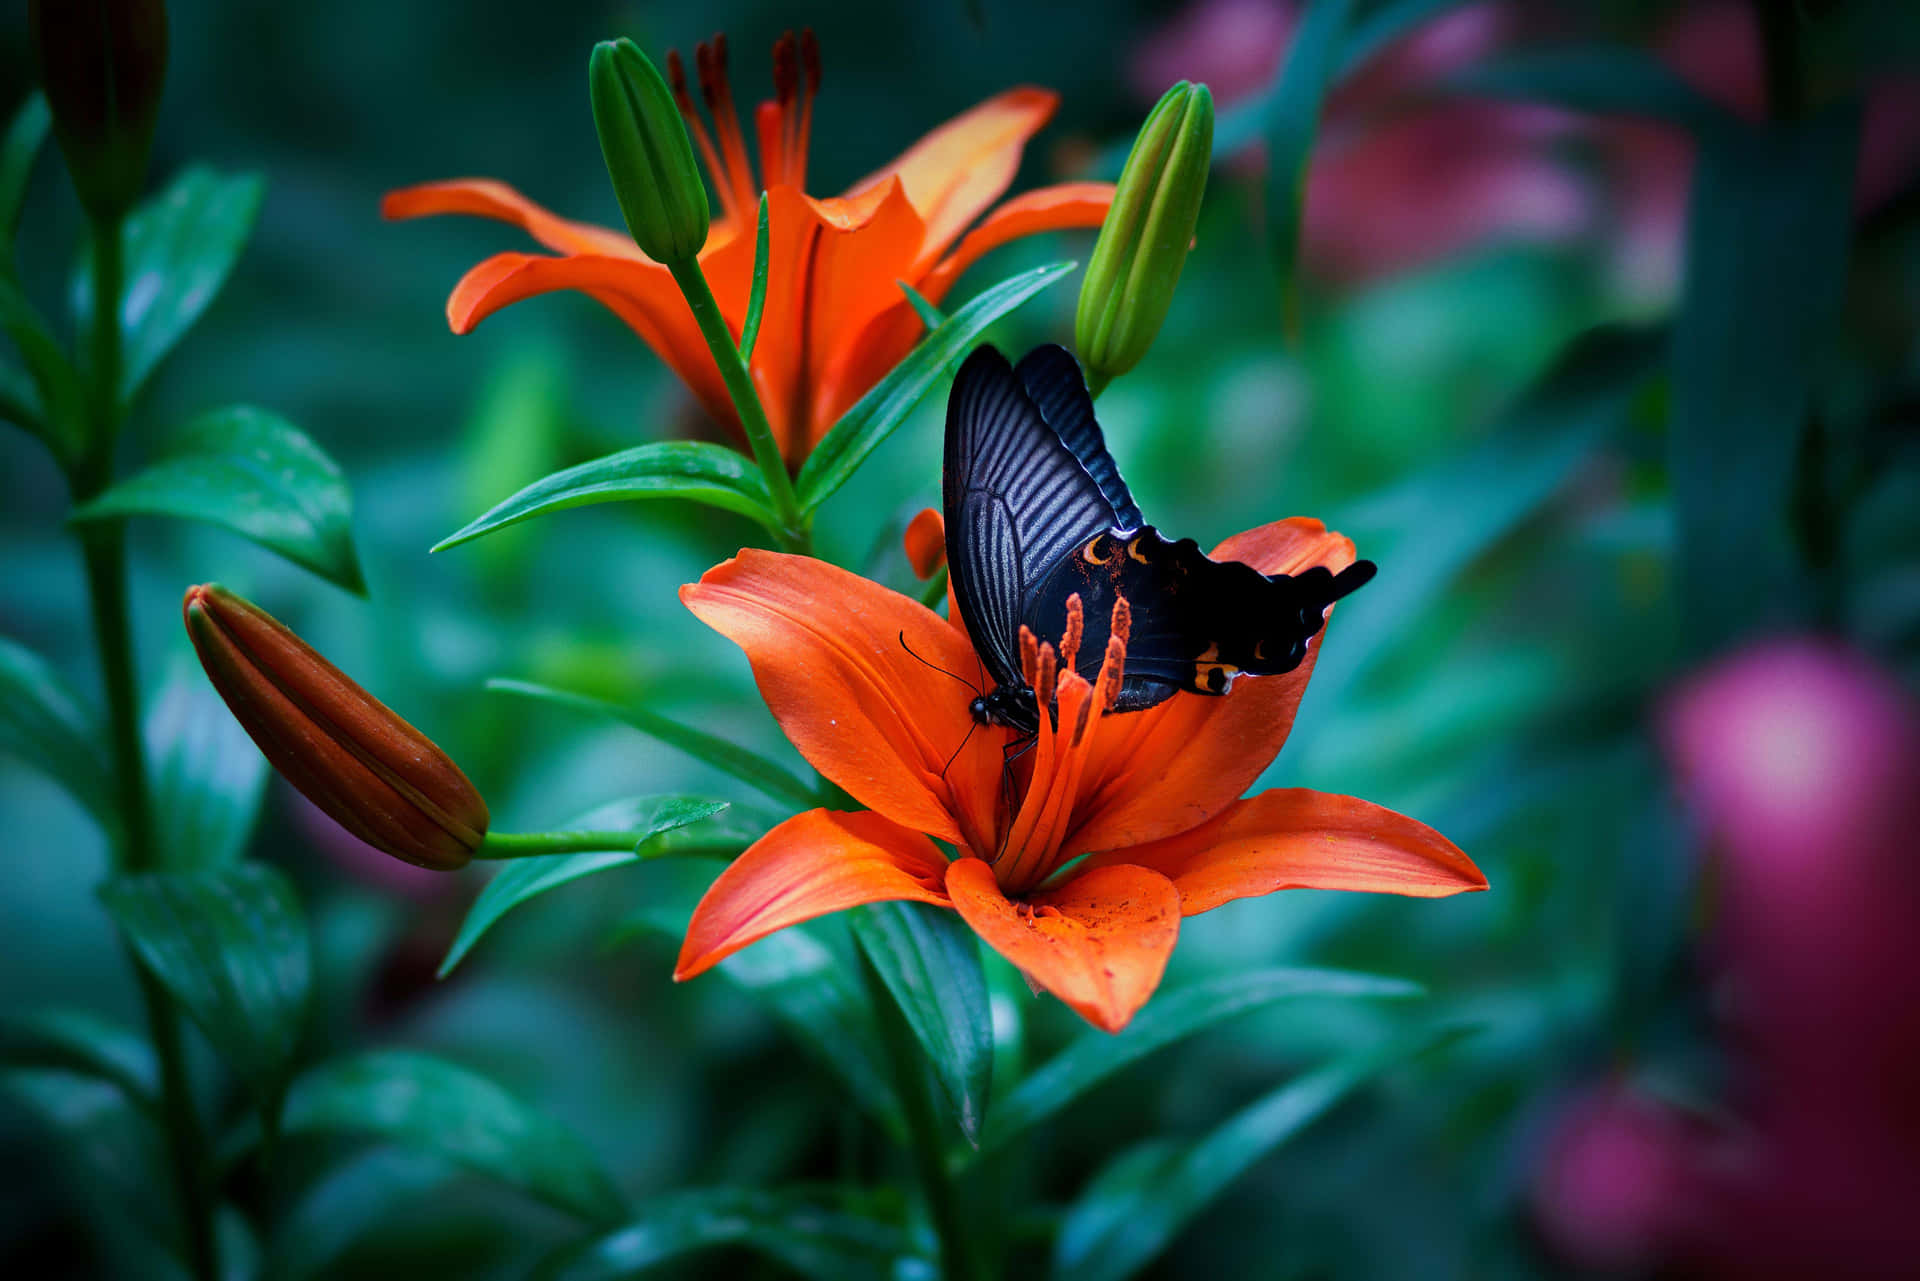 Colorful Butterfly in the Garden Wallpaper